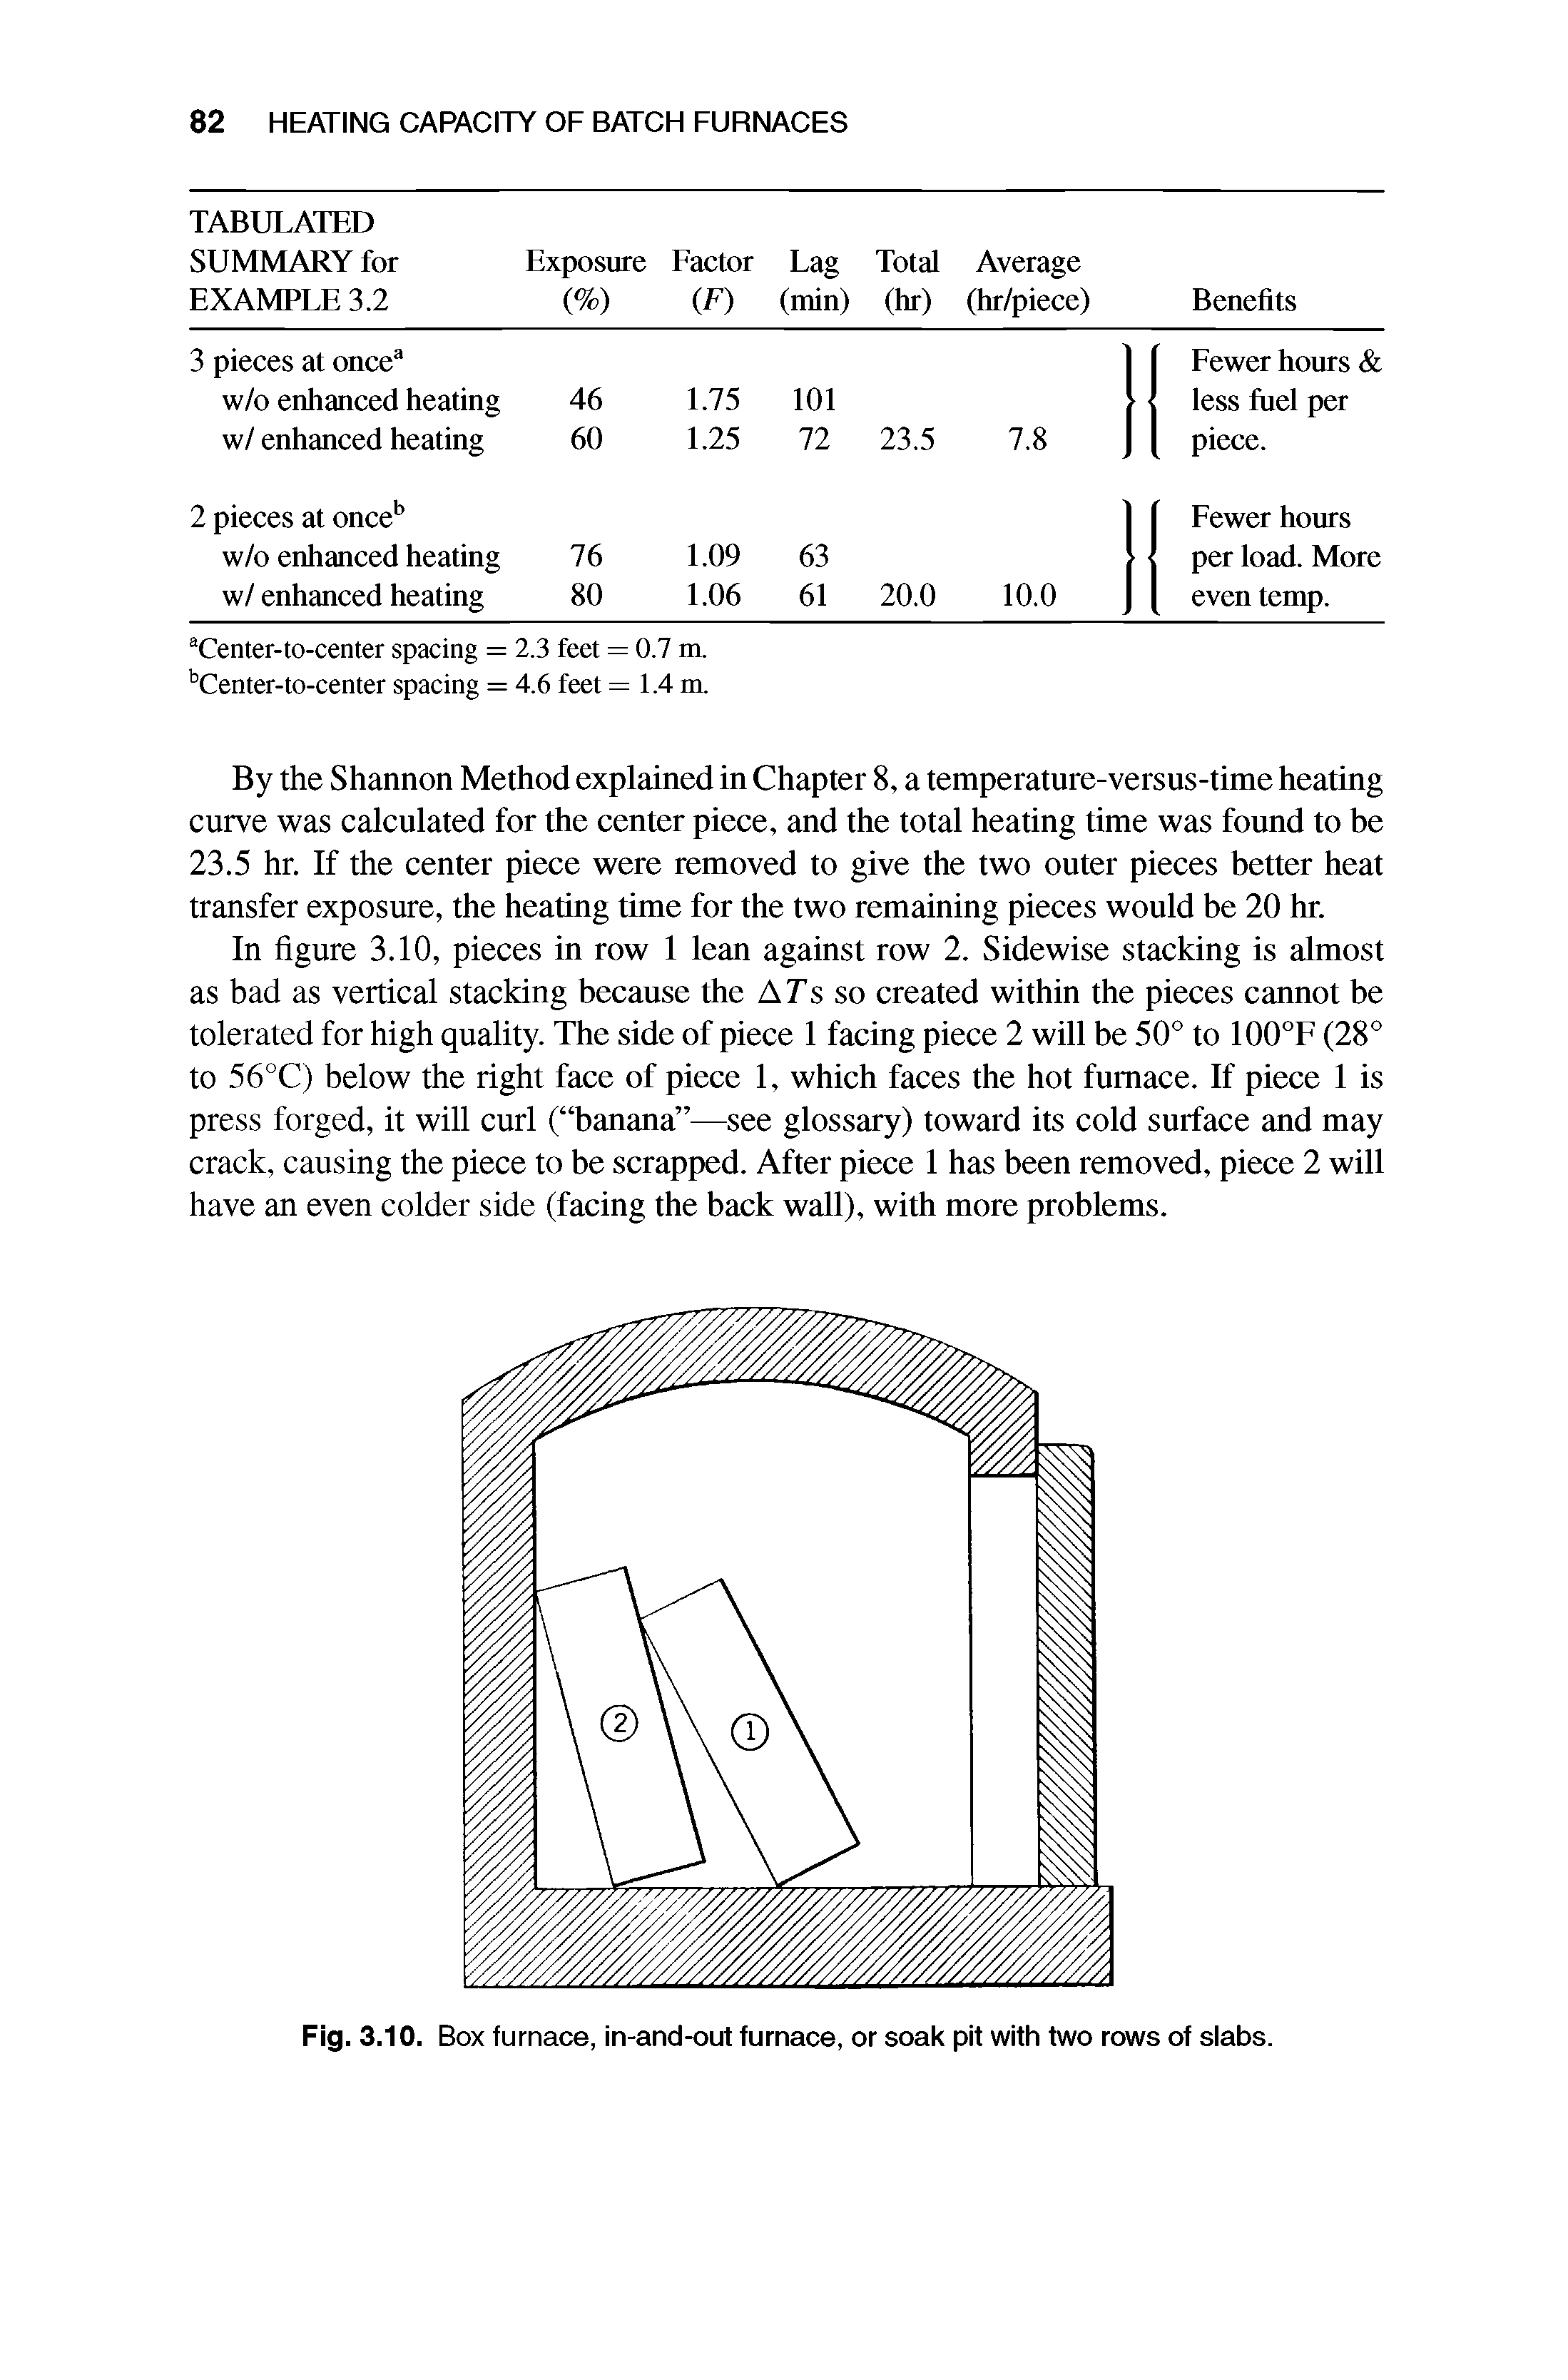 Fig. 3.10. Box furnace, in-and-out furnace, or soak pit with two rows of slabs.